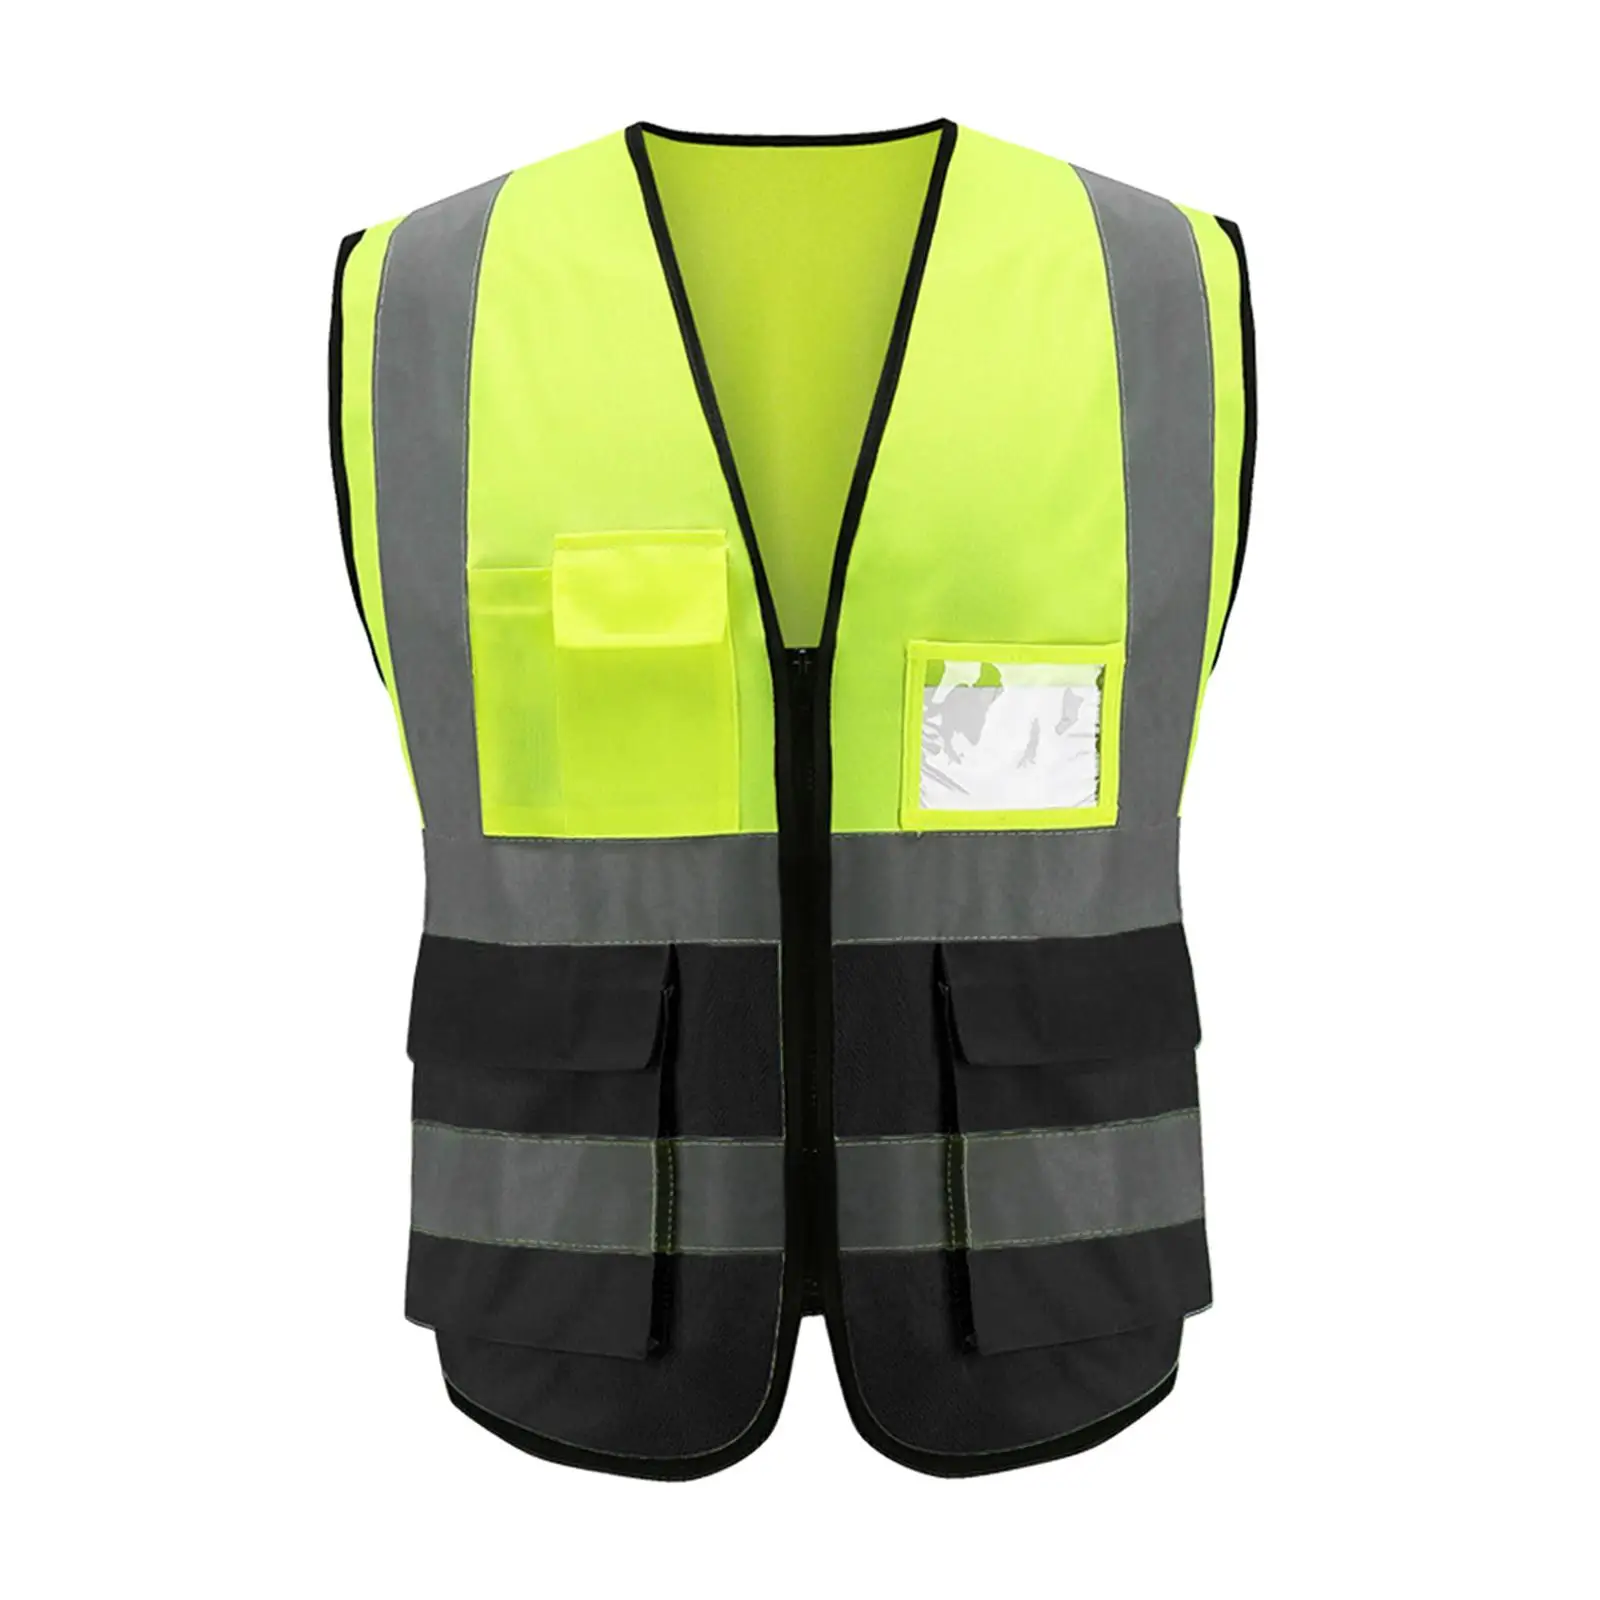 Multi Pocket Reflective Vest, with Reflective Strips Construction Gear Construction Vest for Workers Outdoor Traffic Indoor